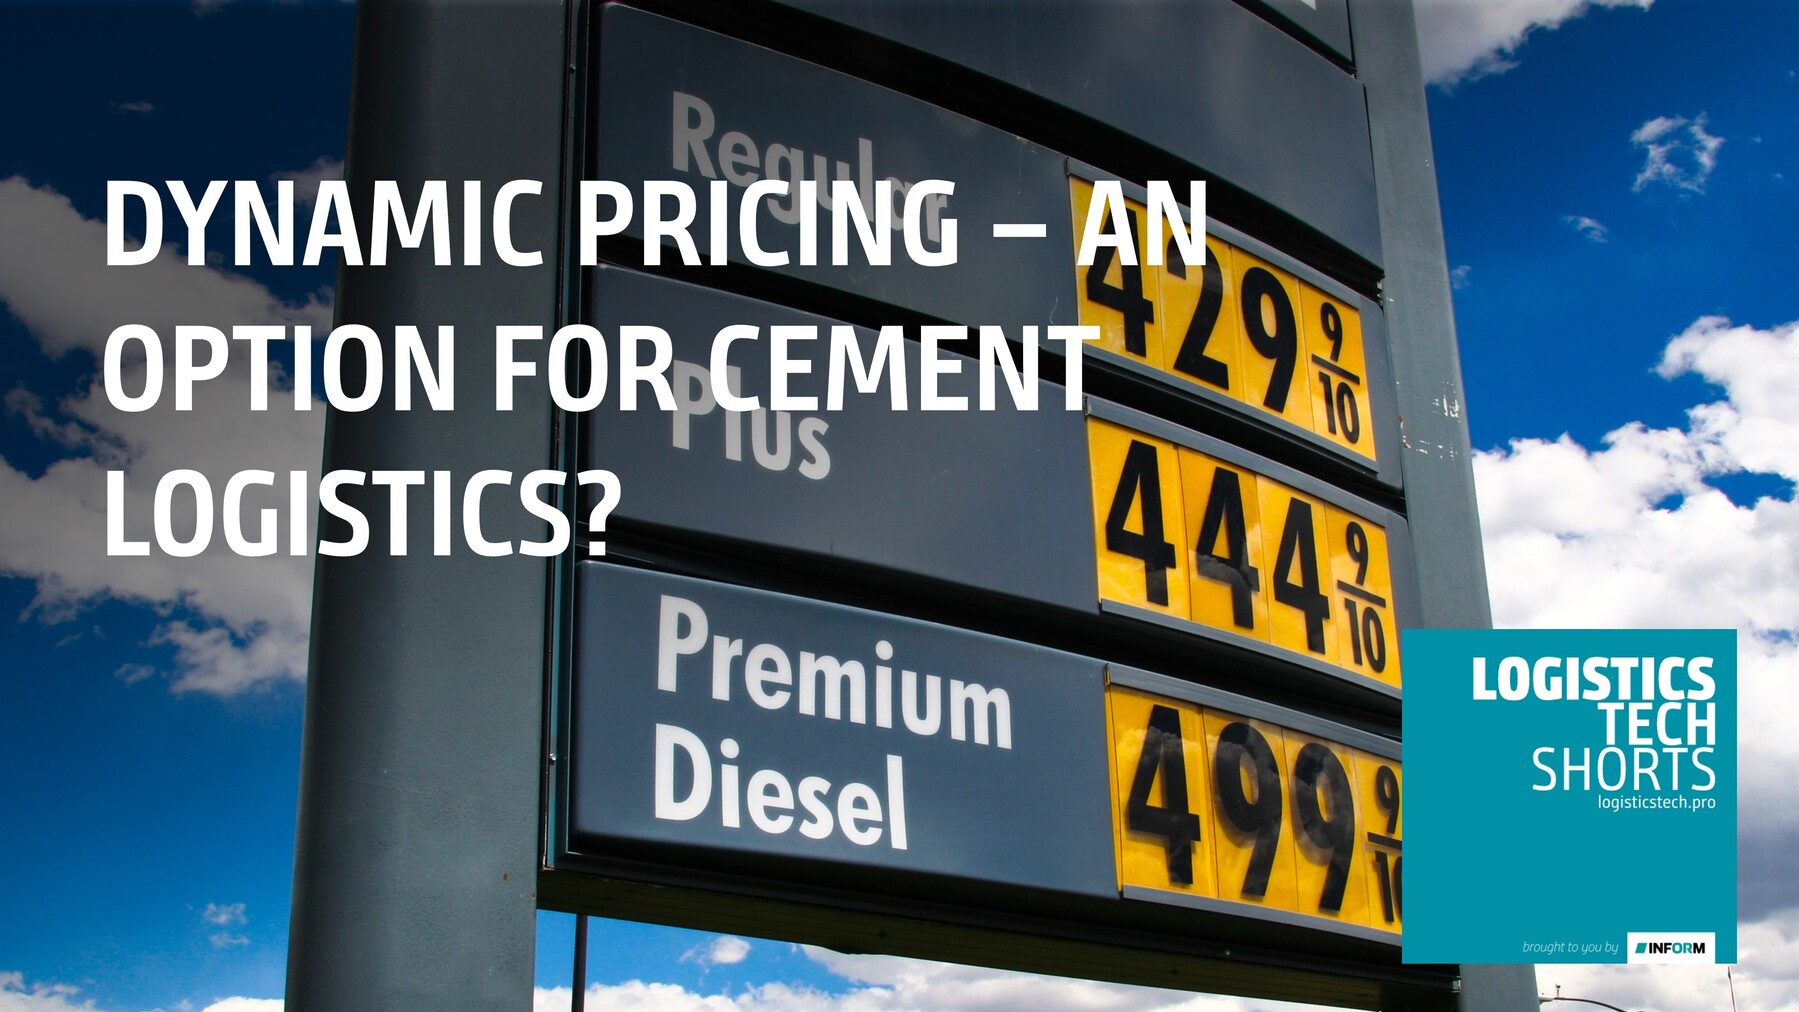 Dynamic Pricing – An Option for Cement?